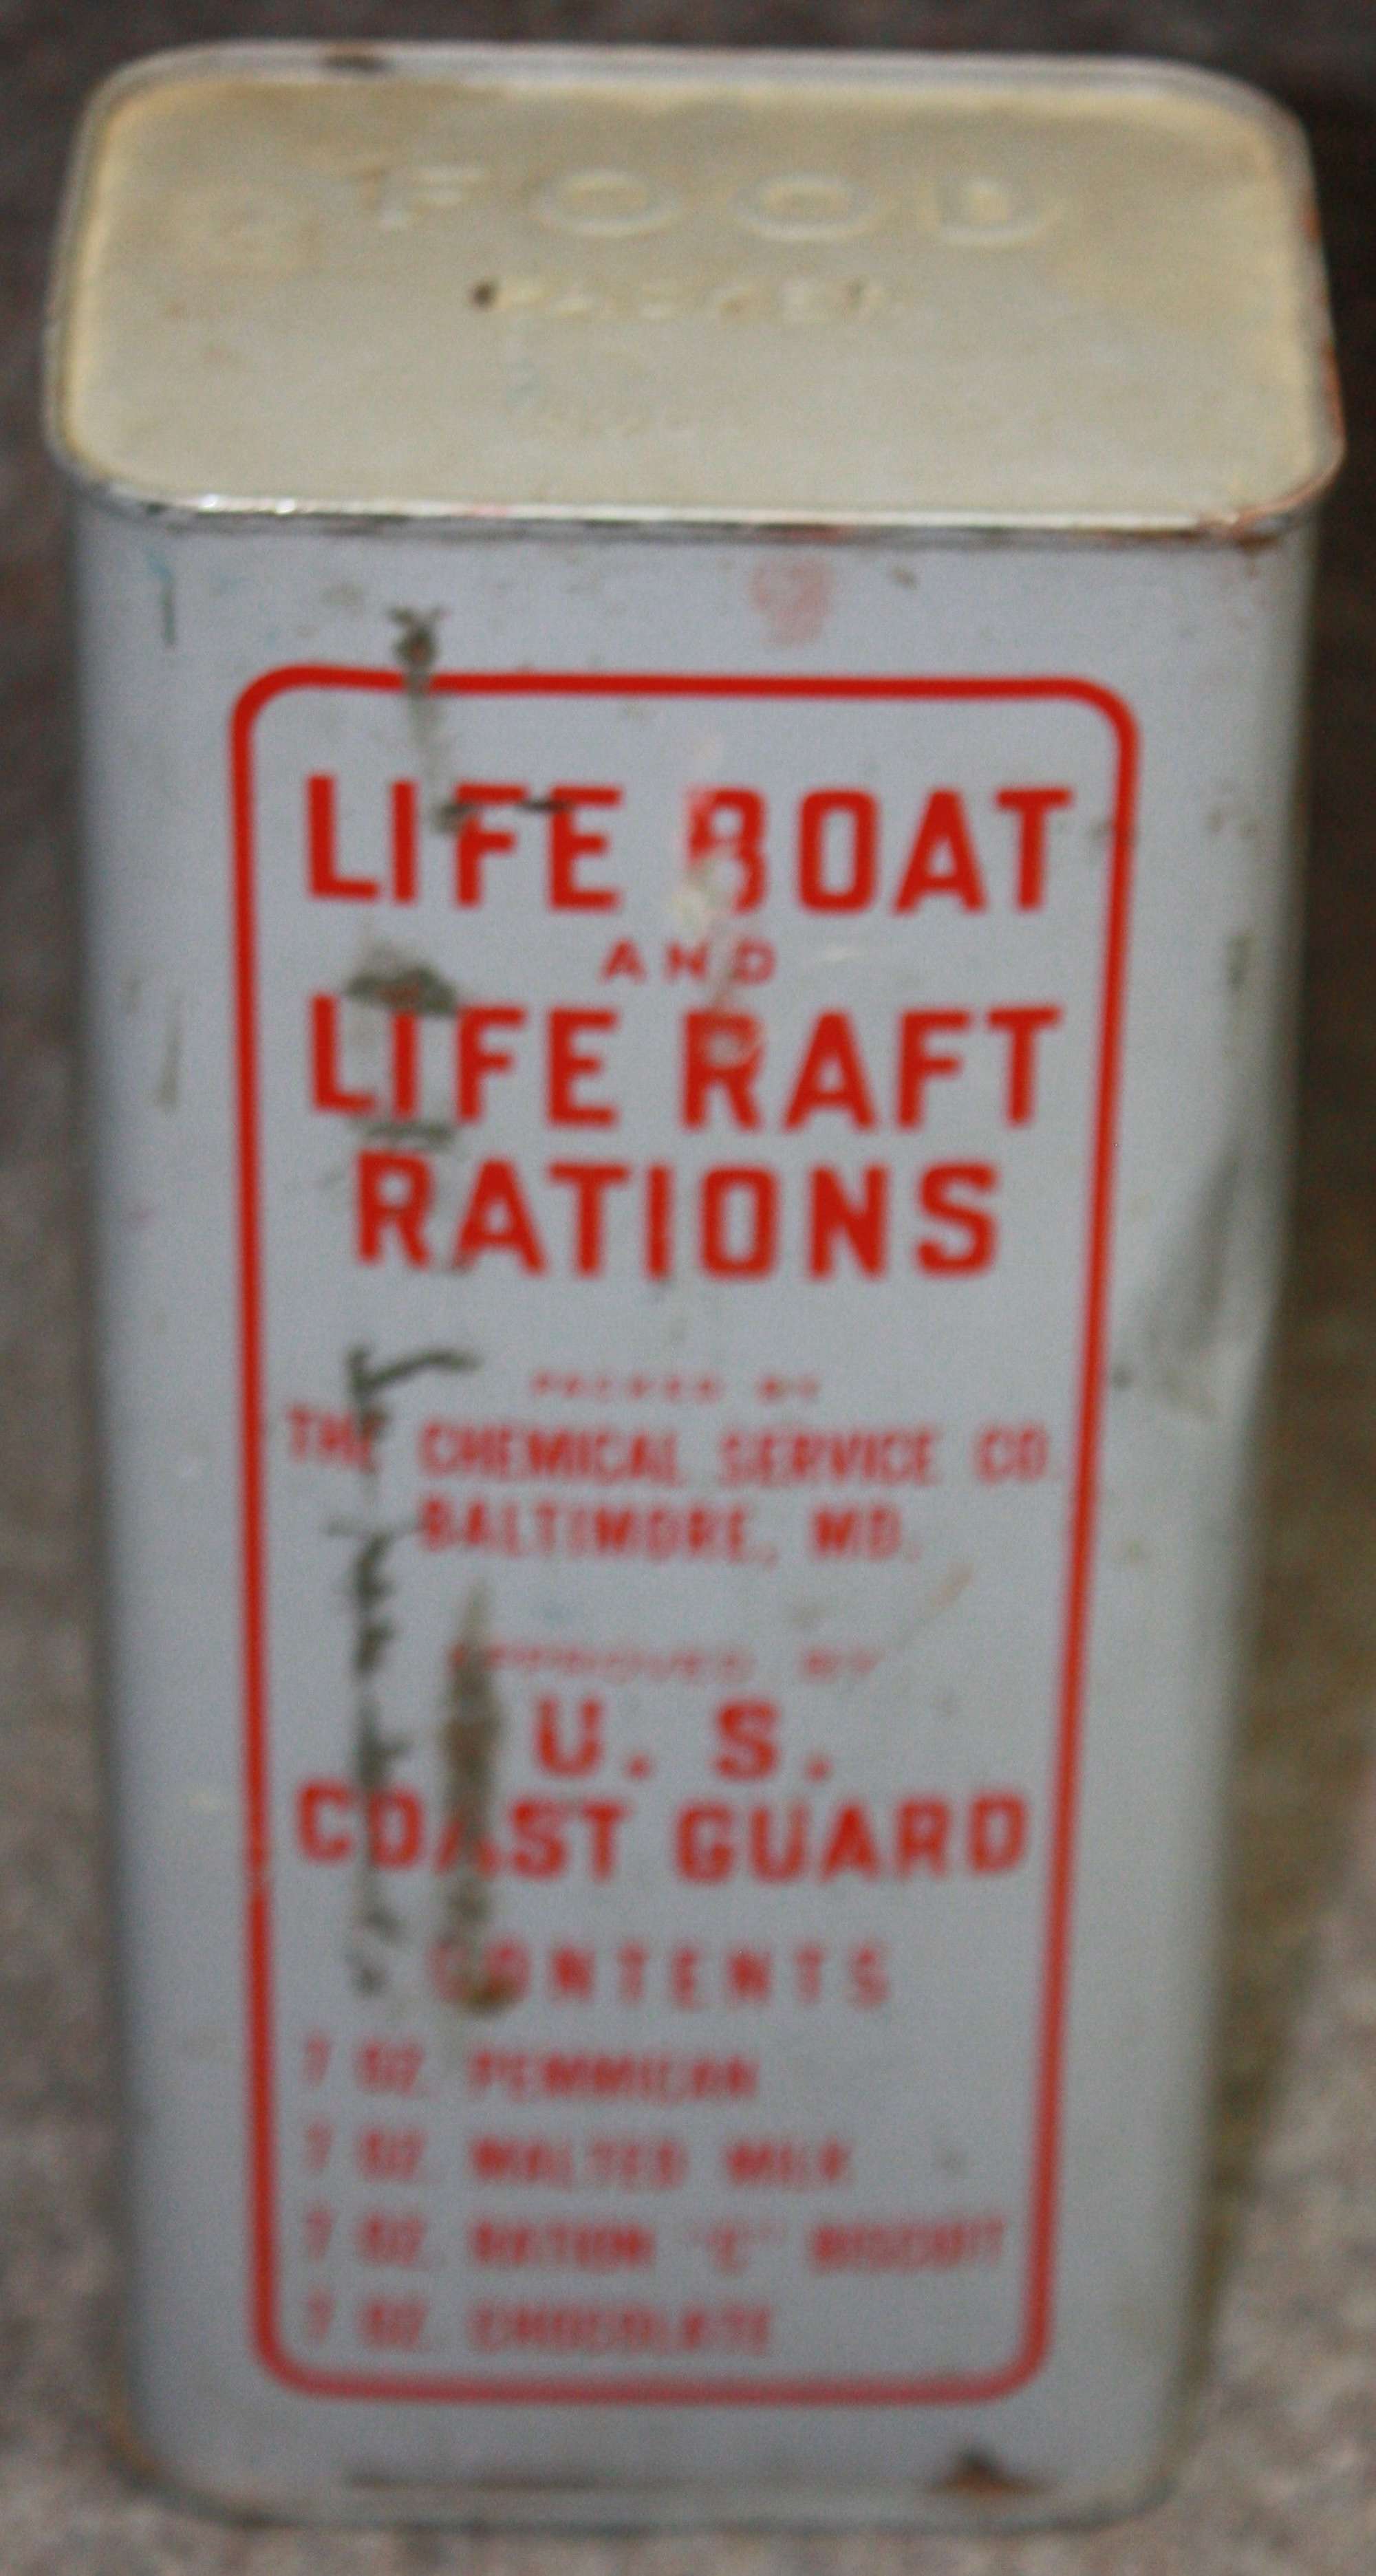 A UNOPENED 1945 DATED US COST GUARD LARGE SIZE LIFE RAFT RATION TIN